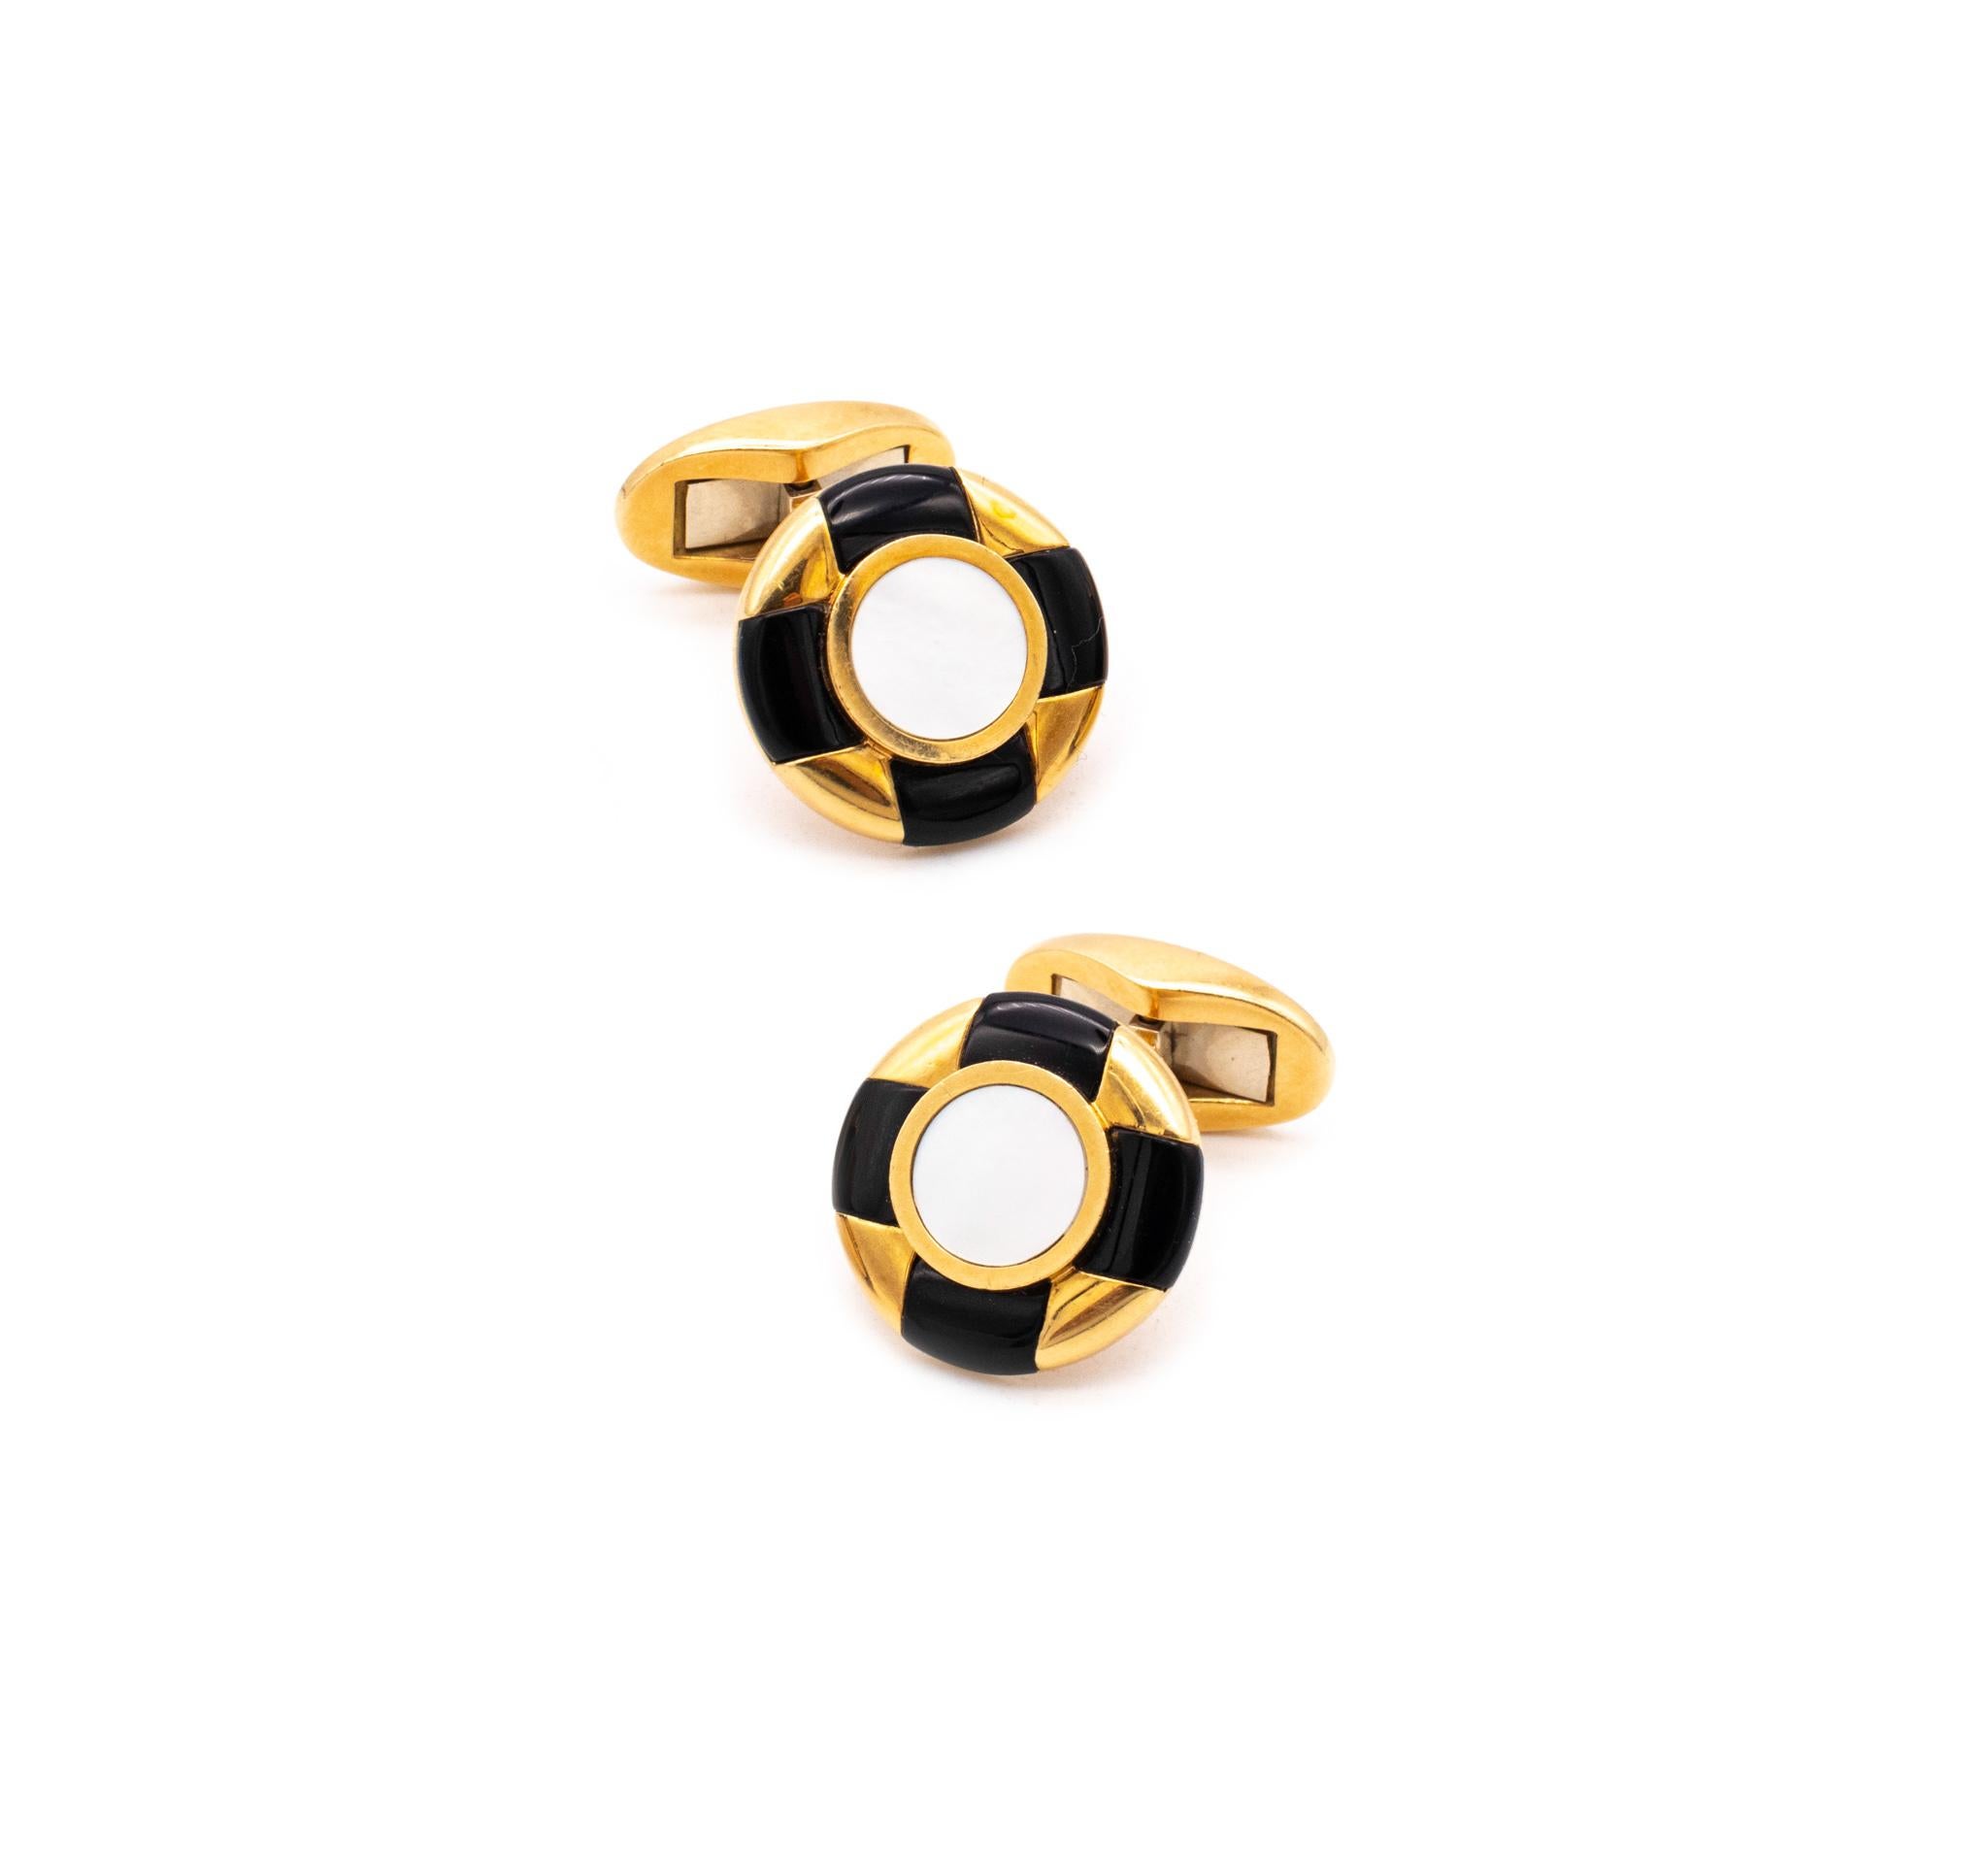 Elegant pair of cufflinks designed by Tiffany & Co.

Handsome jeweled pair, crafted in solid 18 karats of high polished yellow gold and suited with a hinged movable T bar.

Embellished, with a geometric patterns, created from carvings of natural